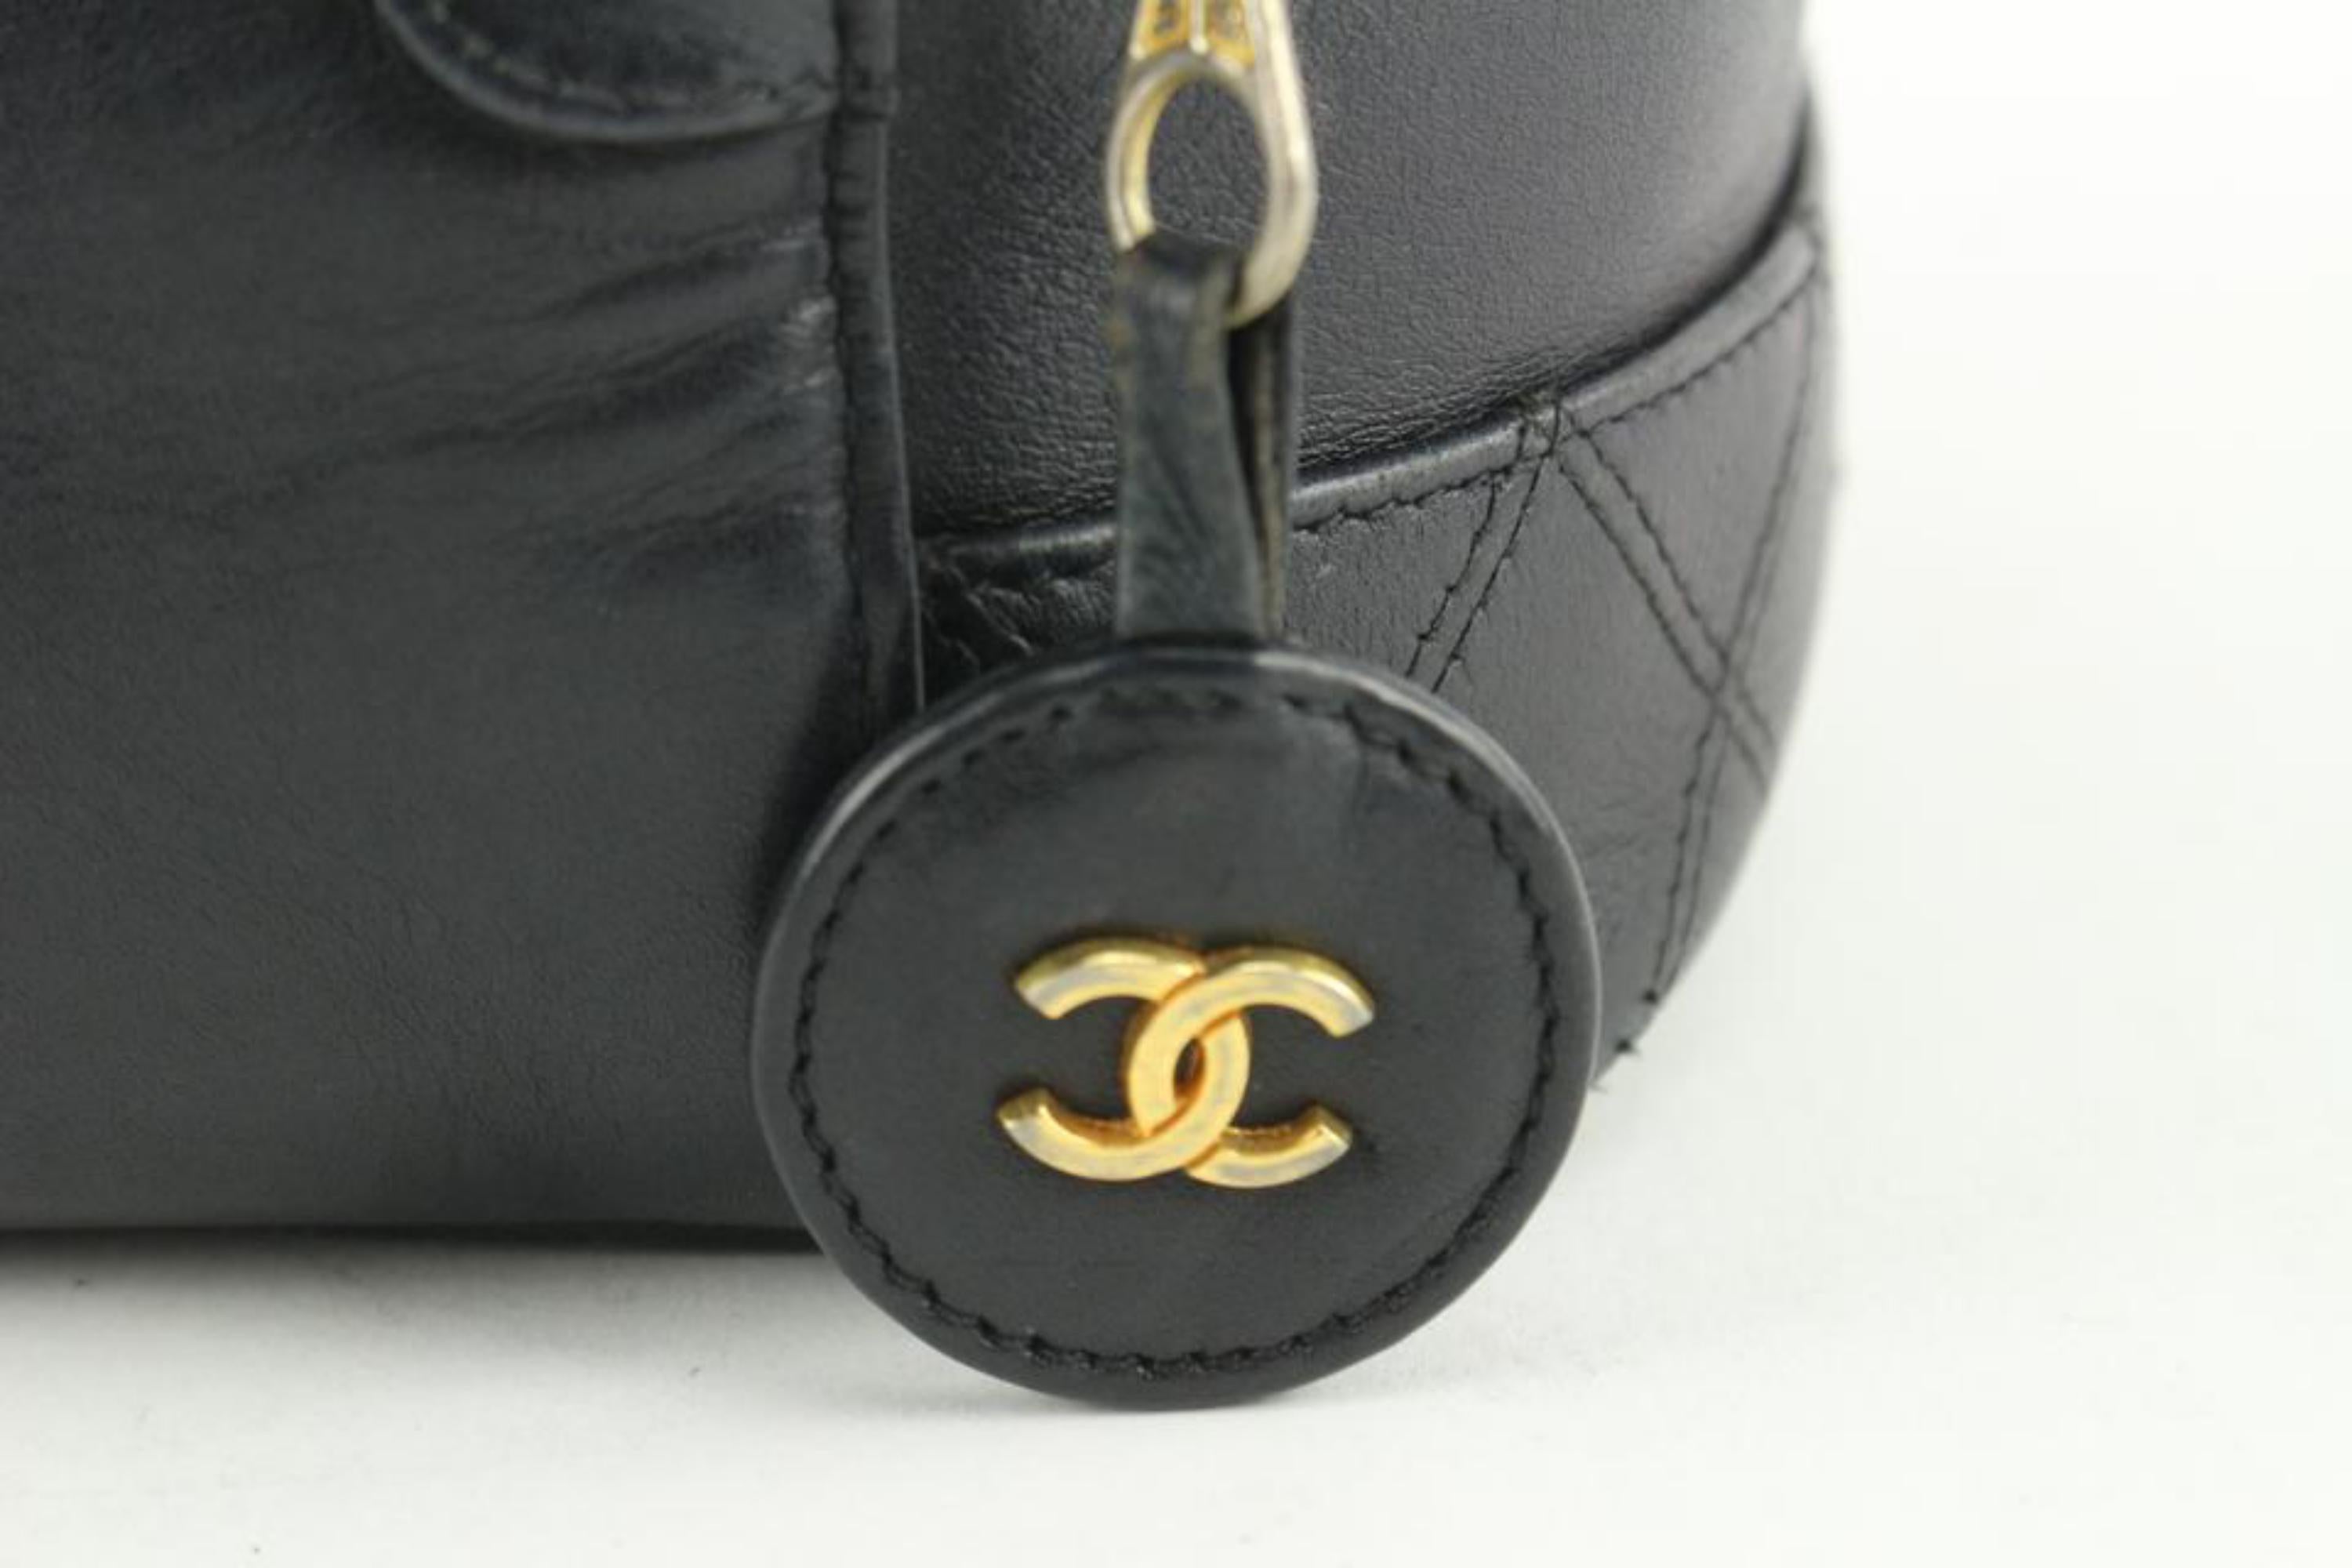 Chanel Black Quilted Lambskin Leather Vanity Case Make Up Pouch 1230c50 For Sale 1